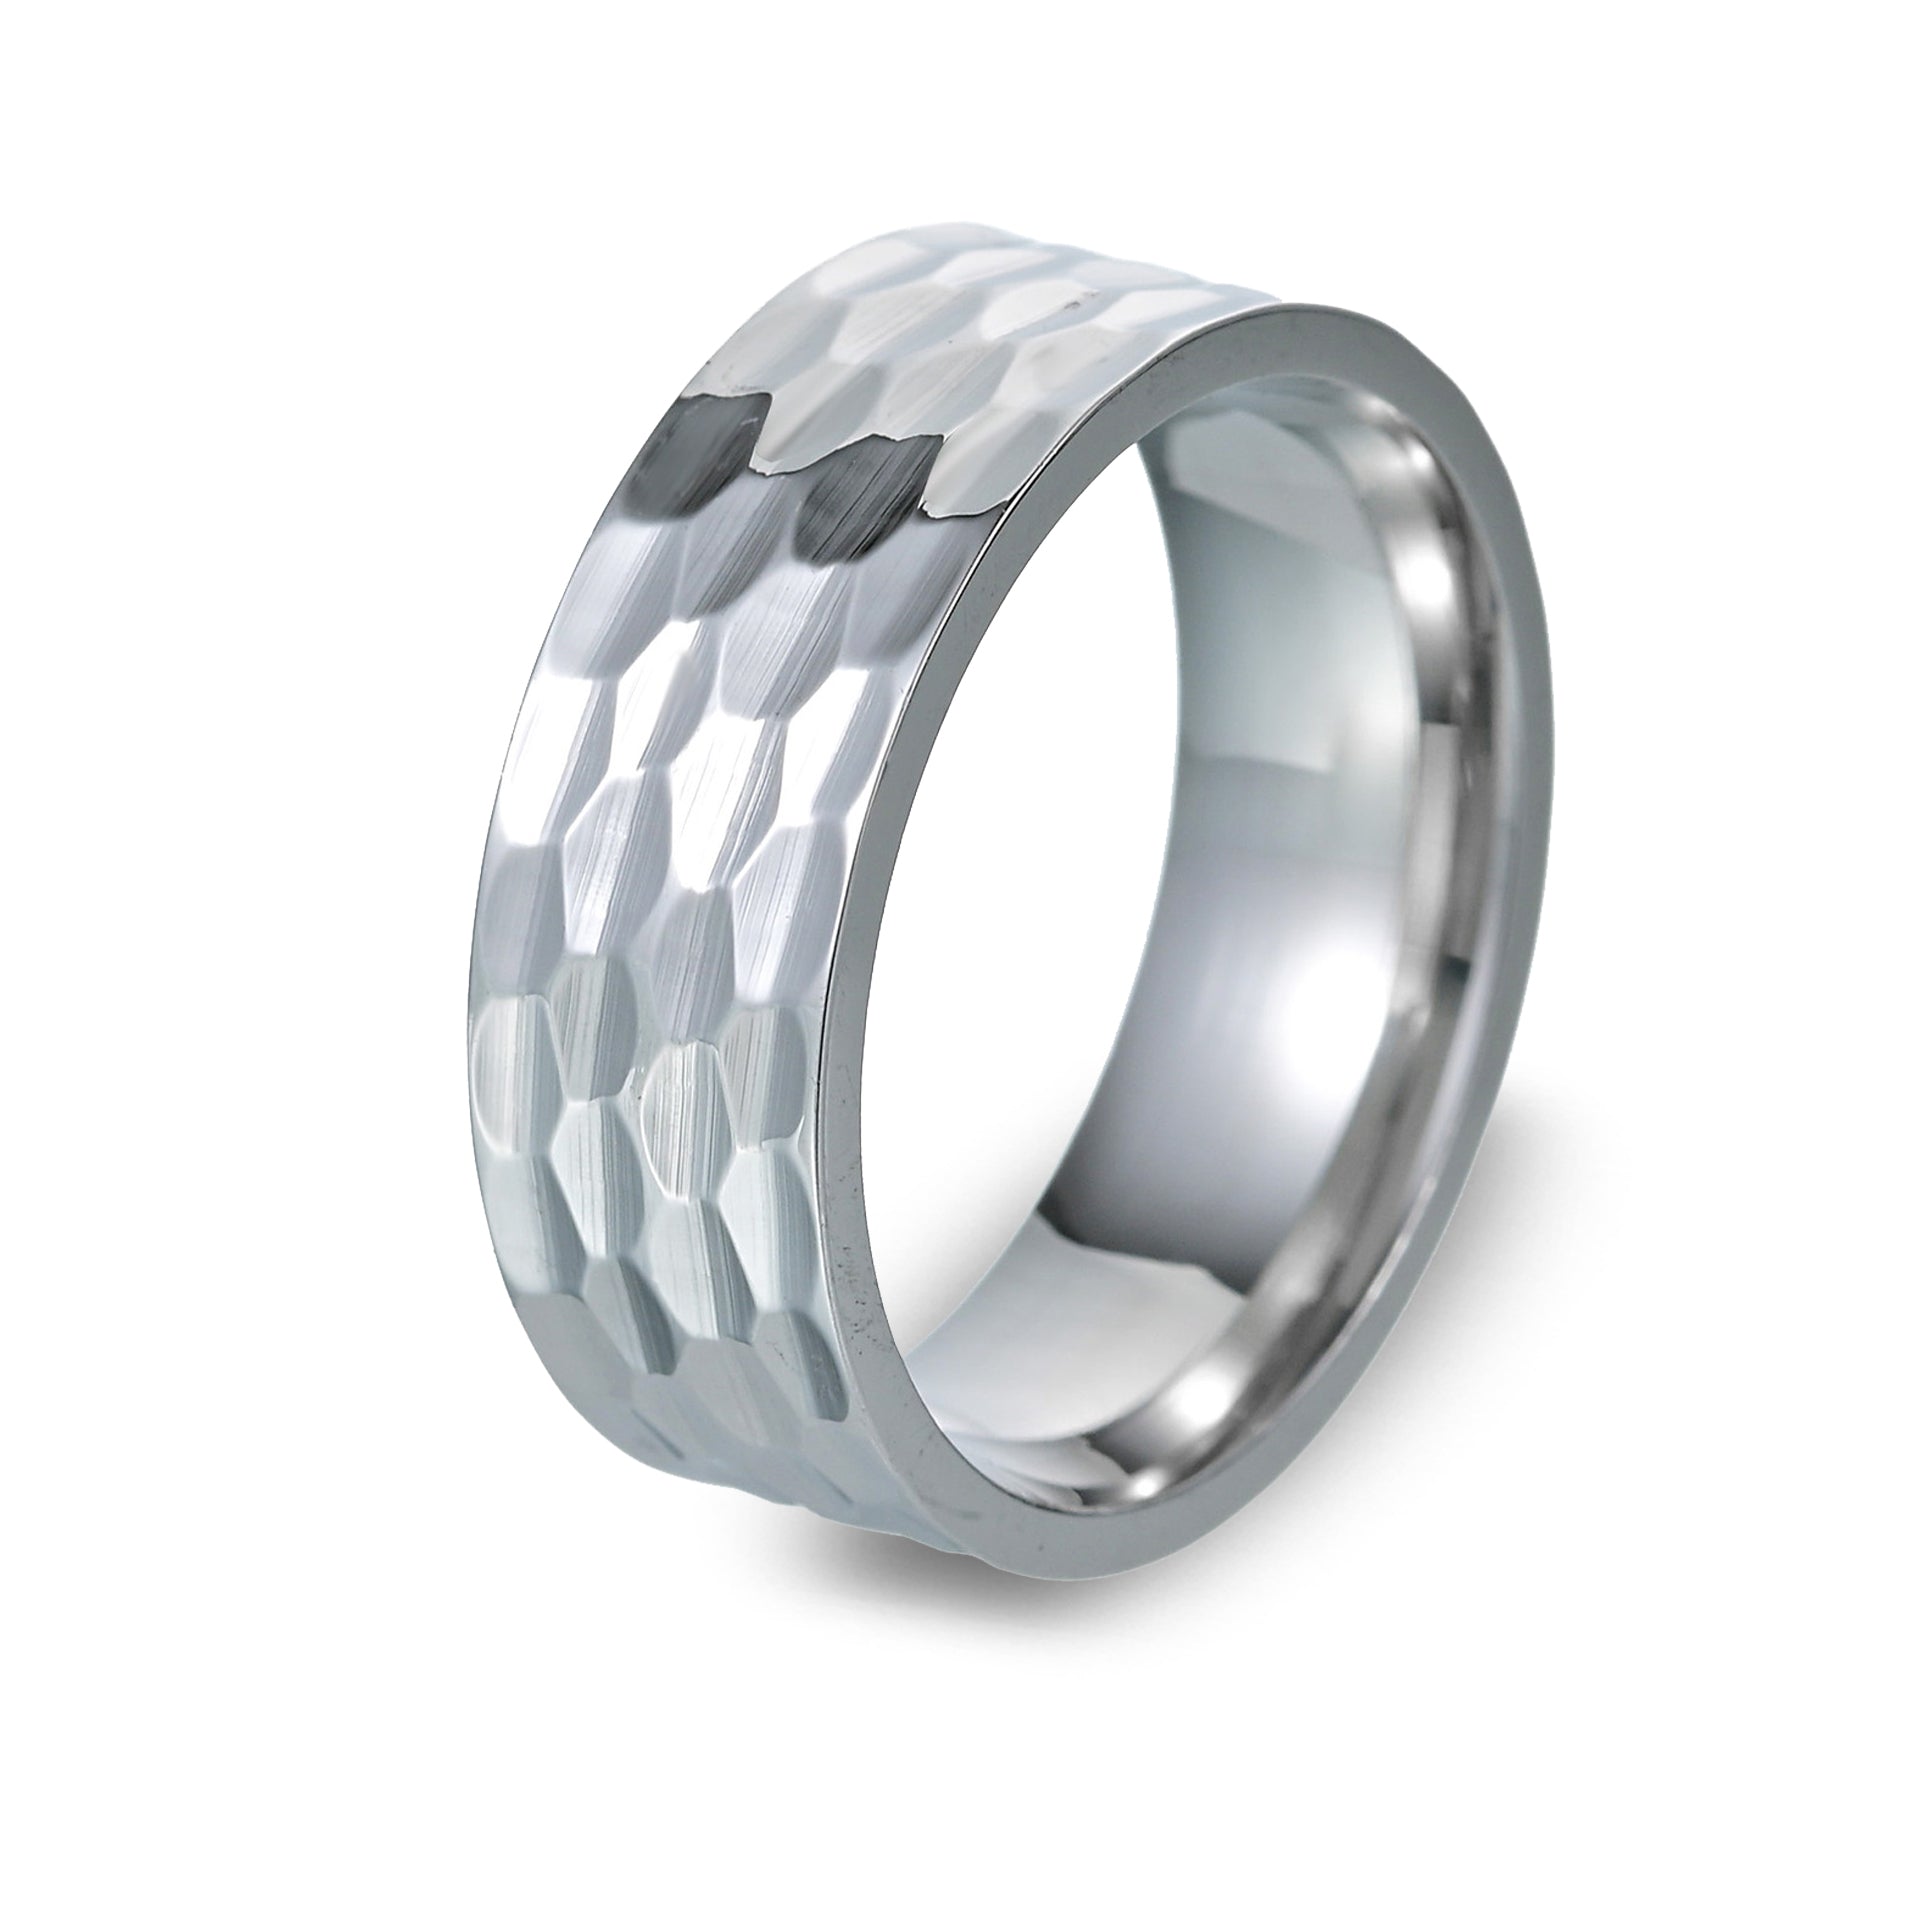 The Electric - Hammered Titanium Ring